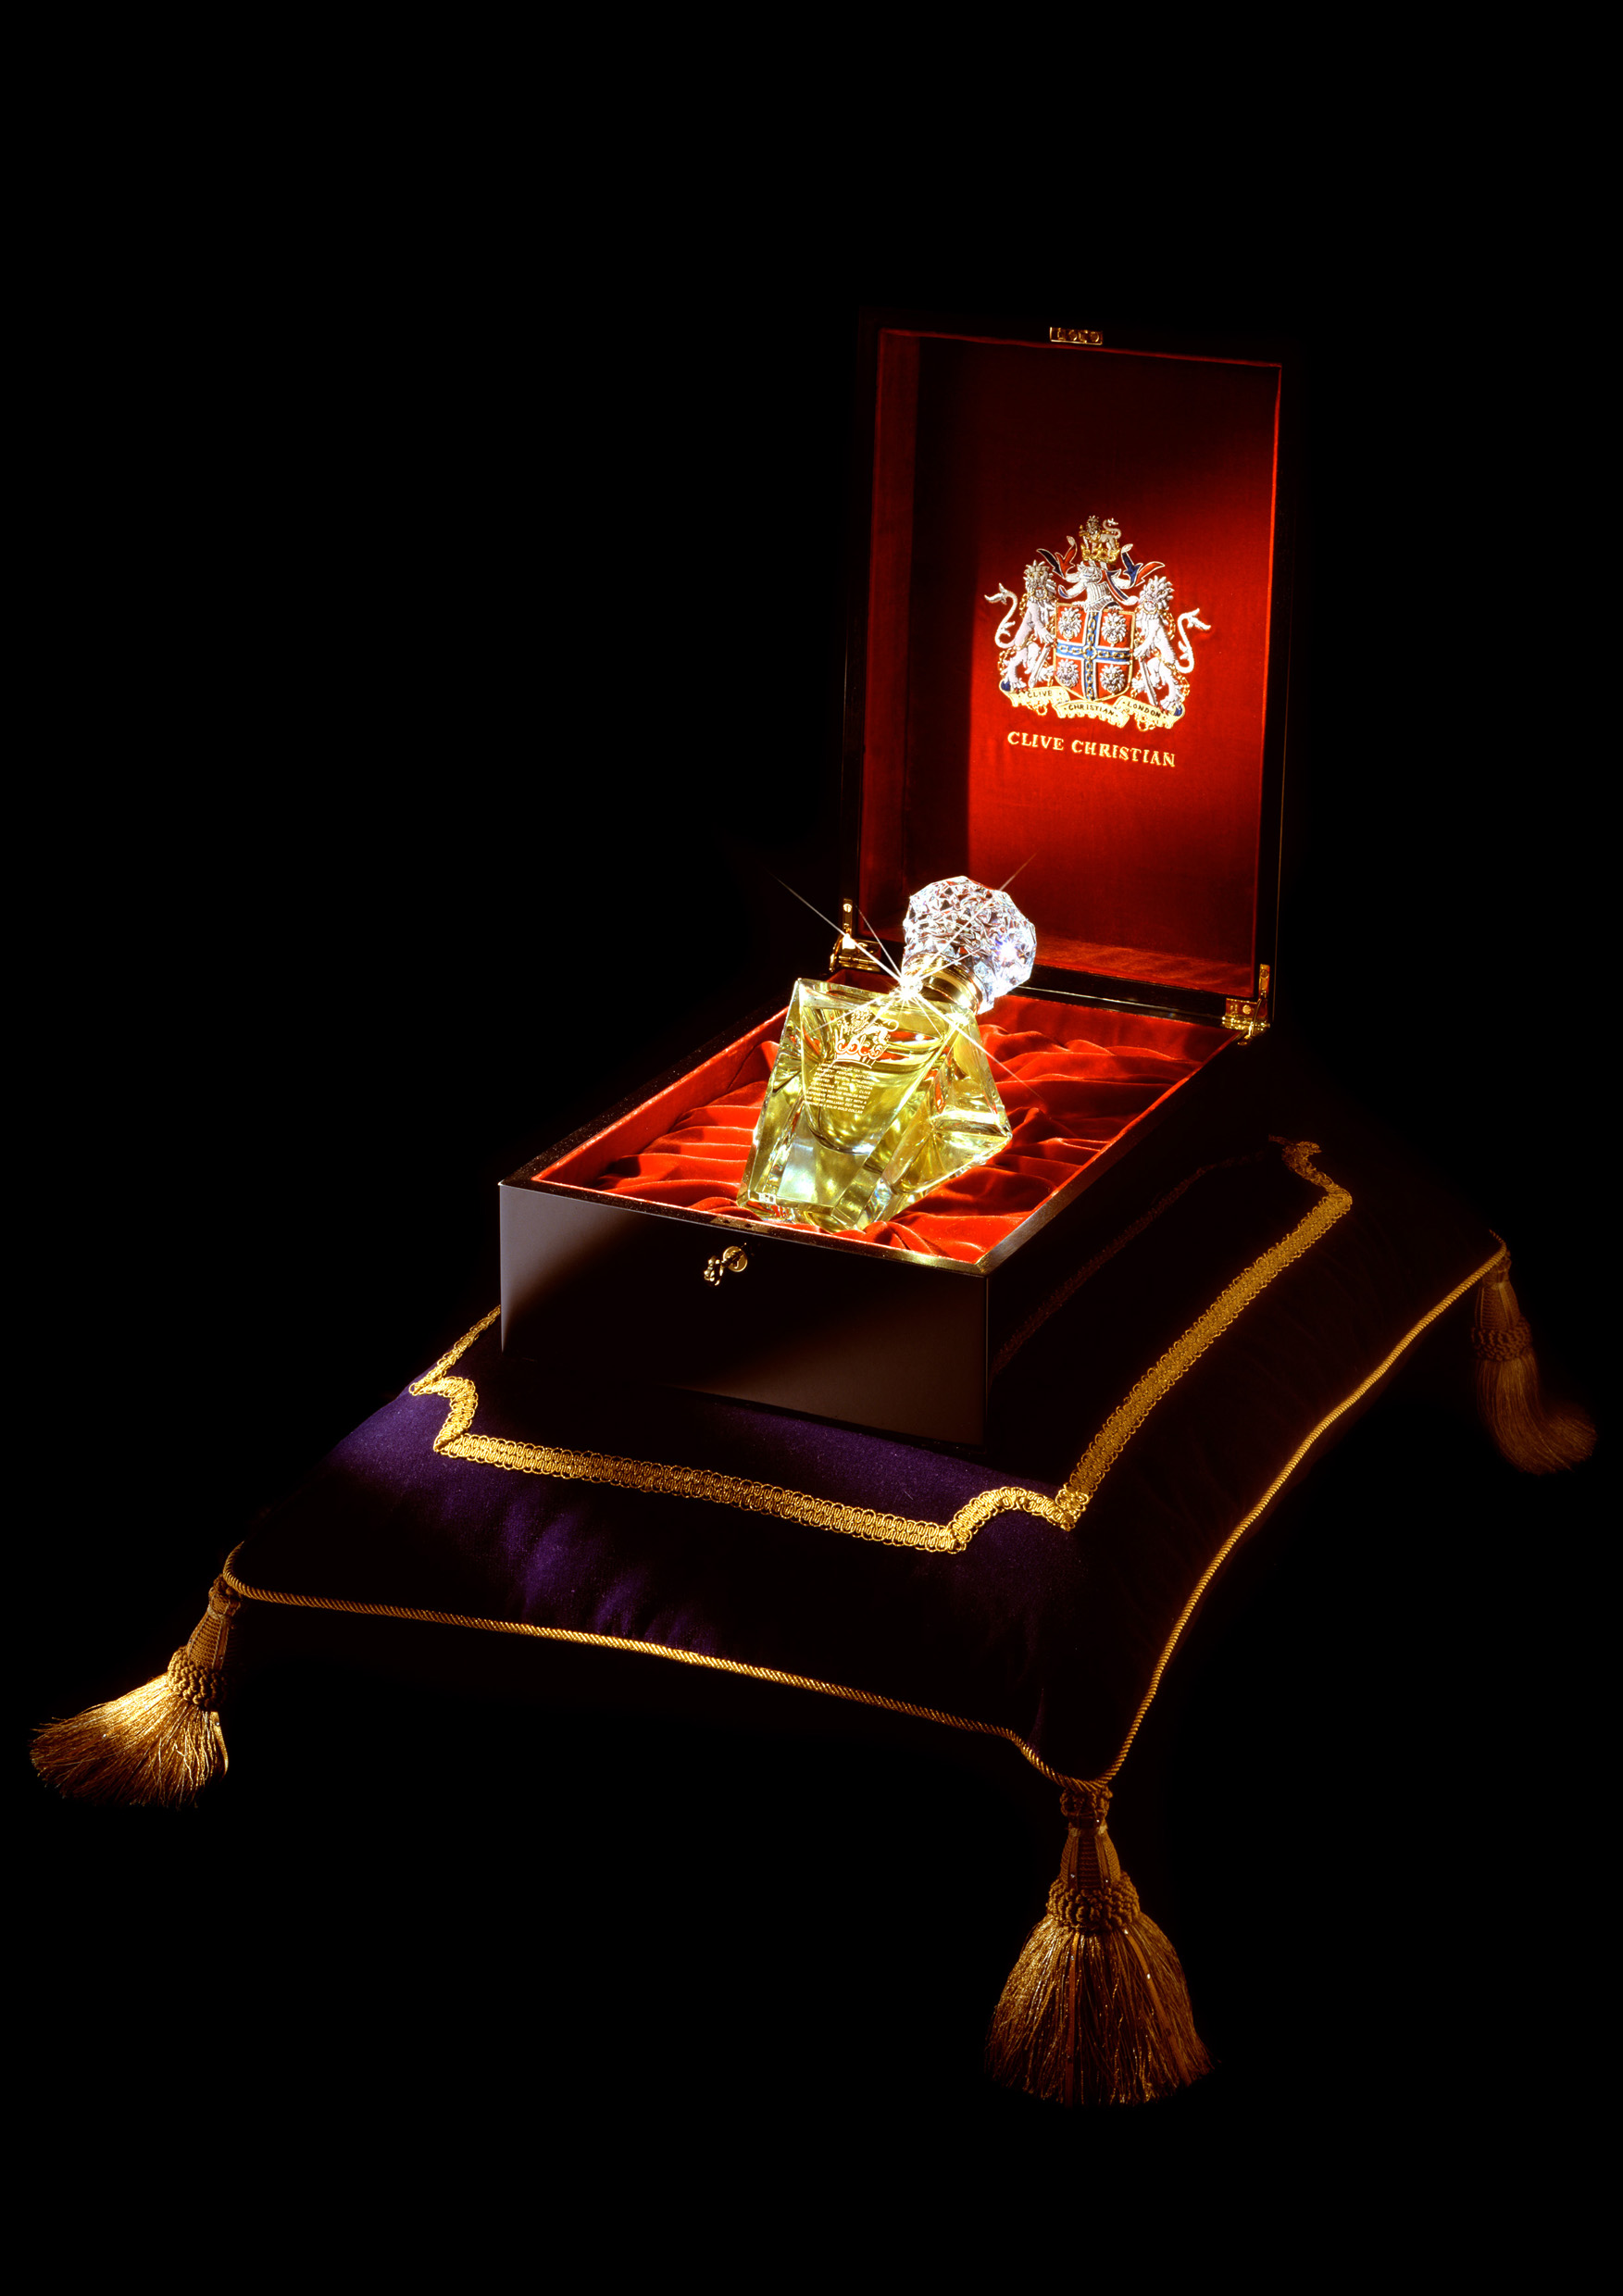 clive-christian-no-1-perfume-imperial-majesty-edition